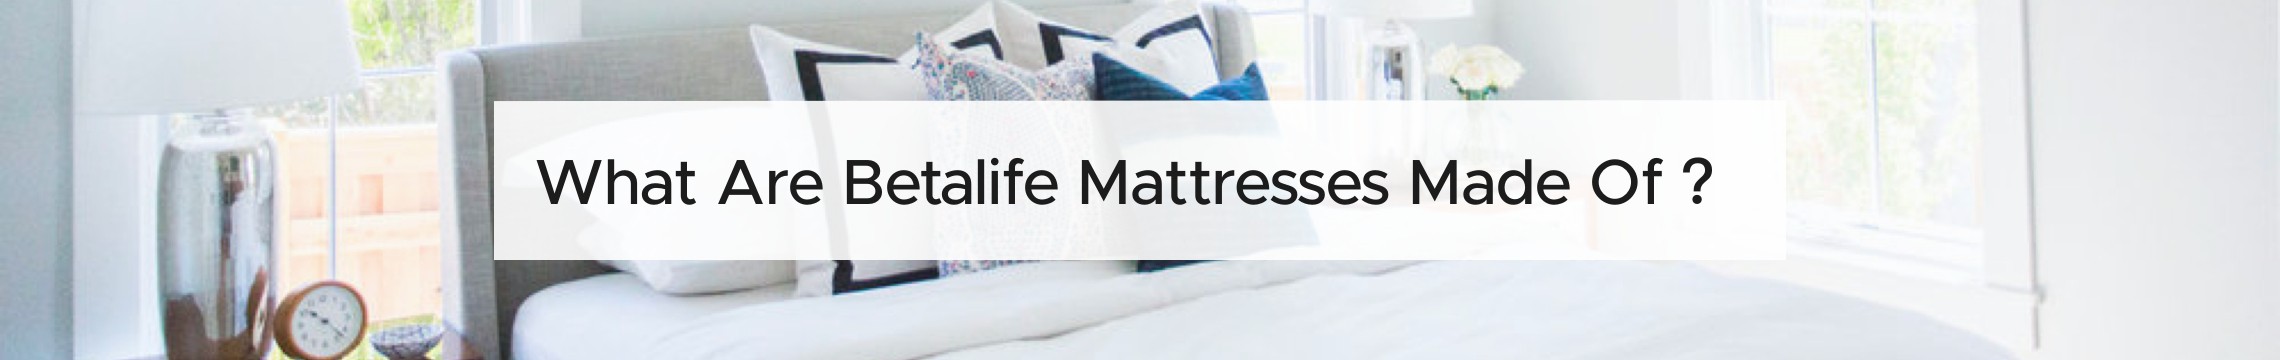 What Are Betalife Mattresses Made Of